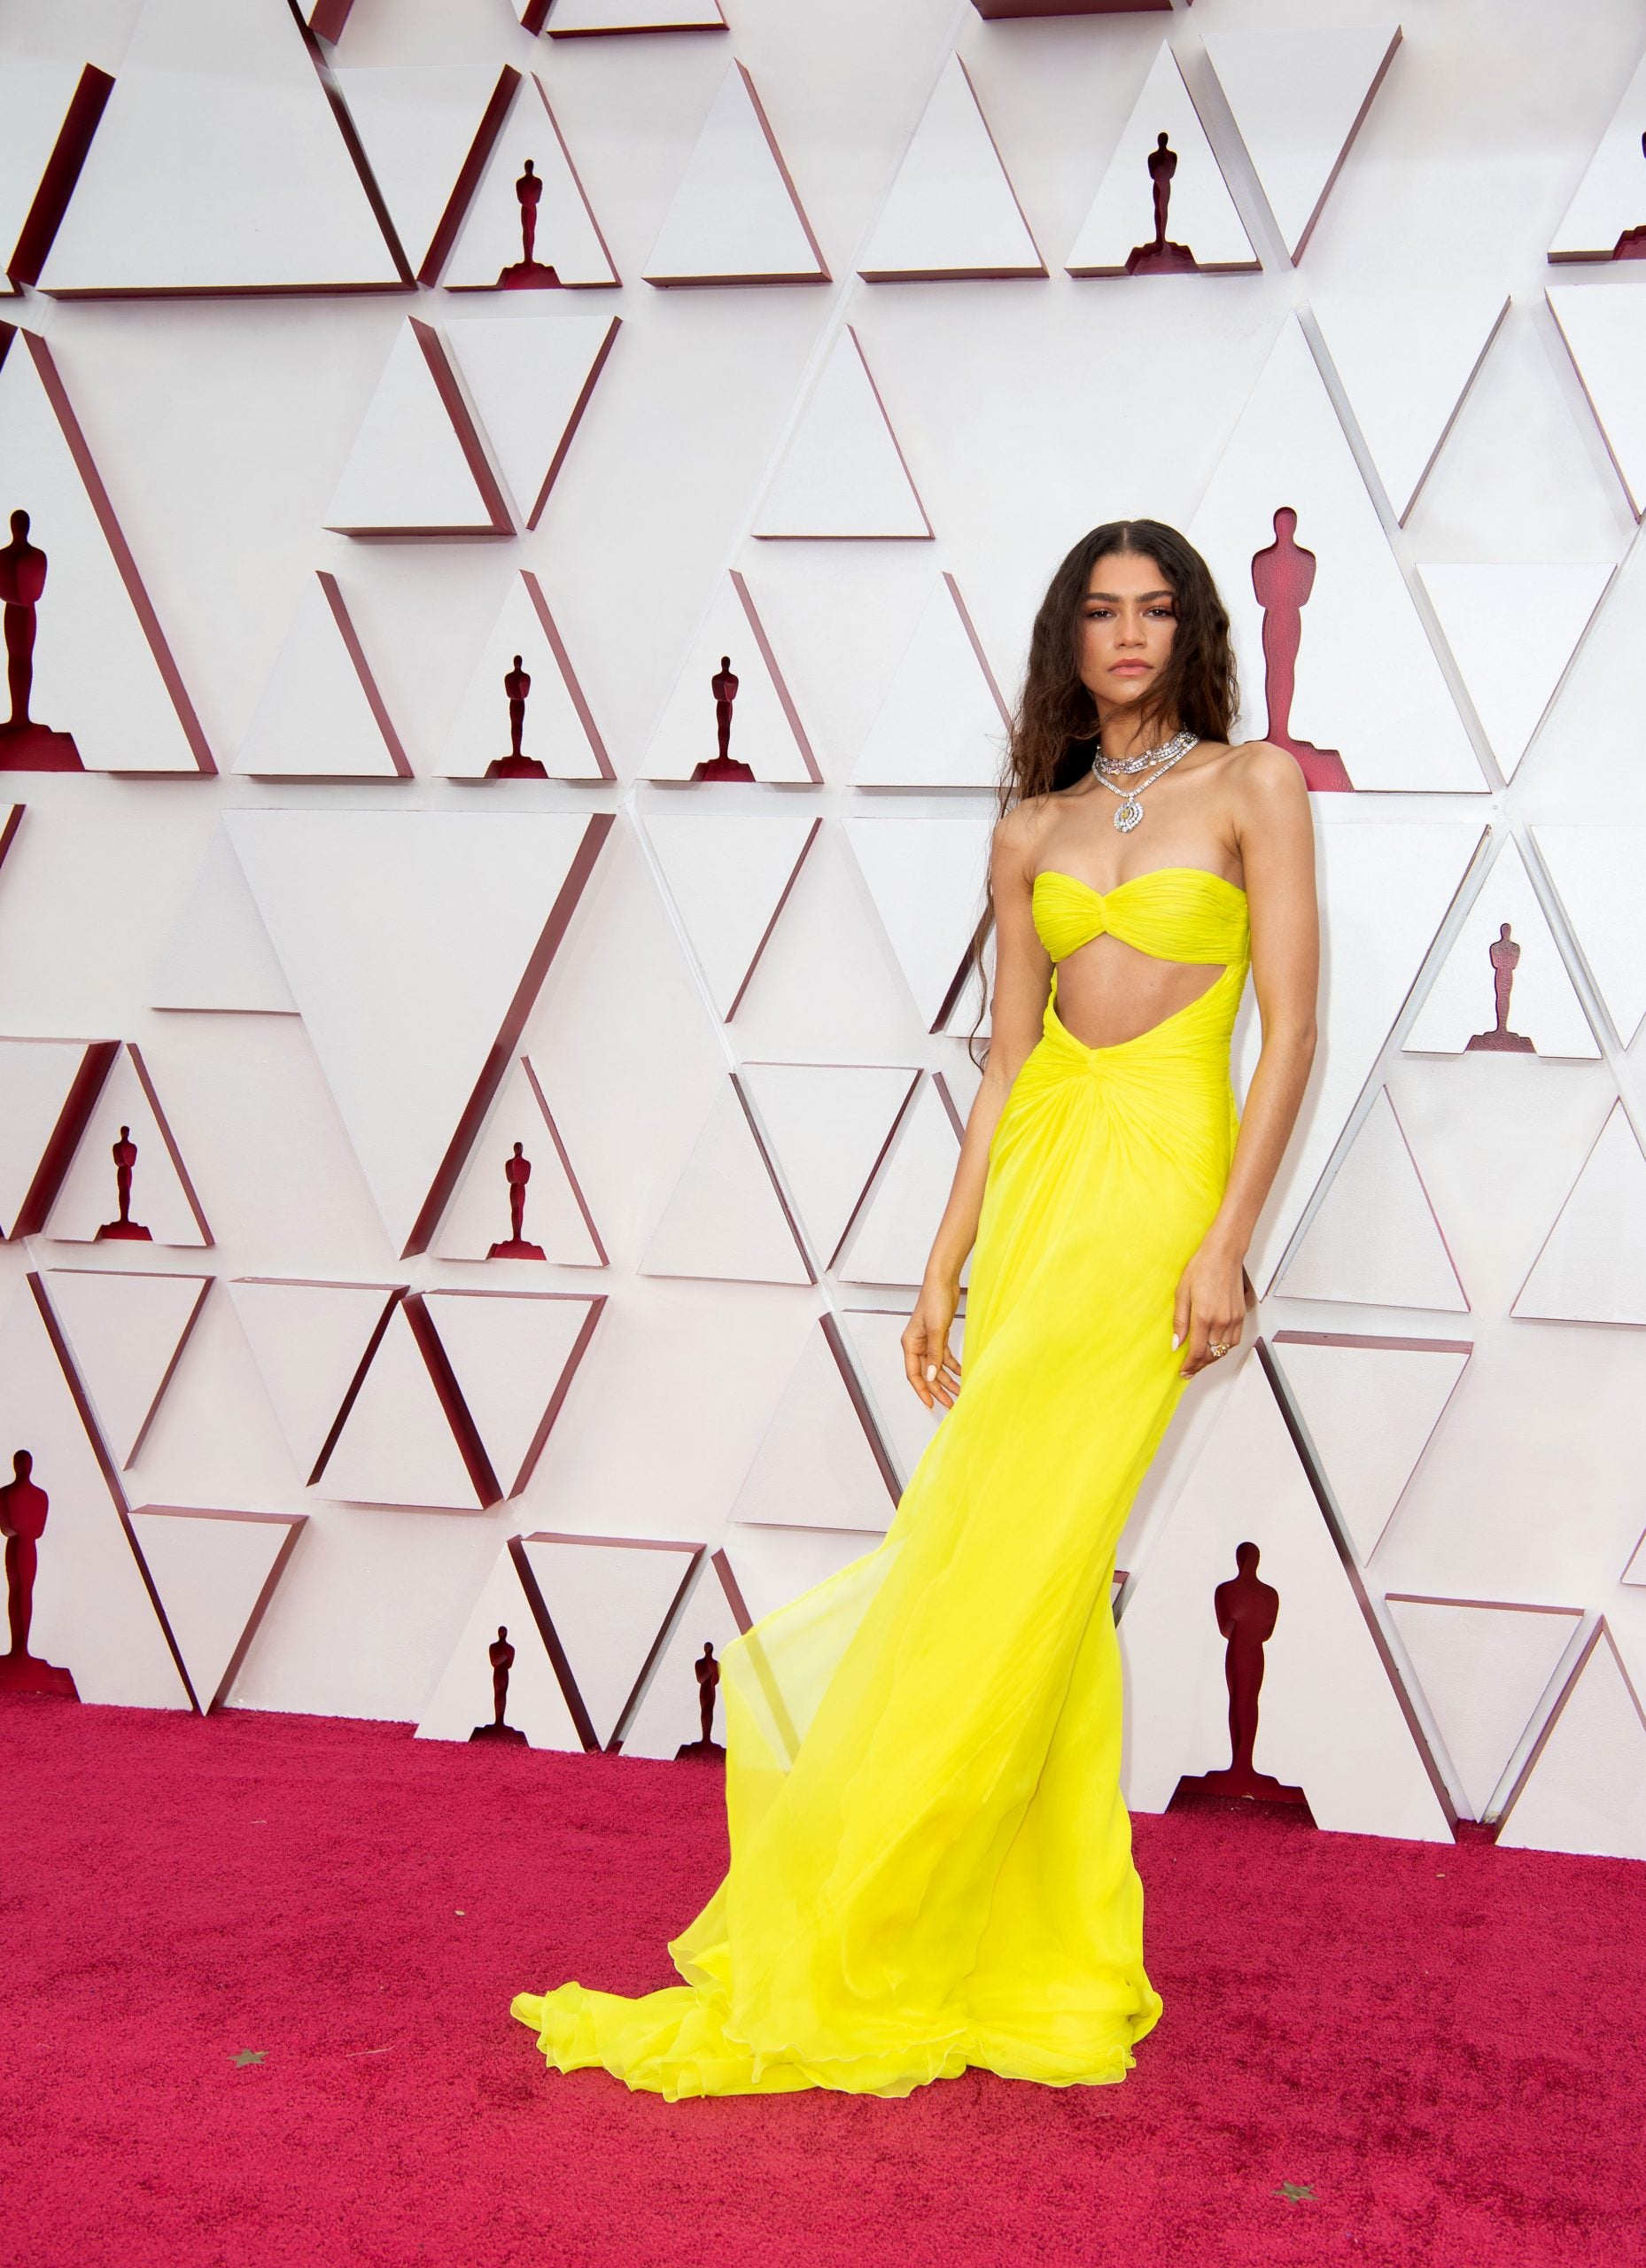 Zendaya Was Breathtaking In This Cher-Inspired Valentino Gown At The 2021 Oscars